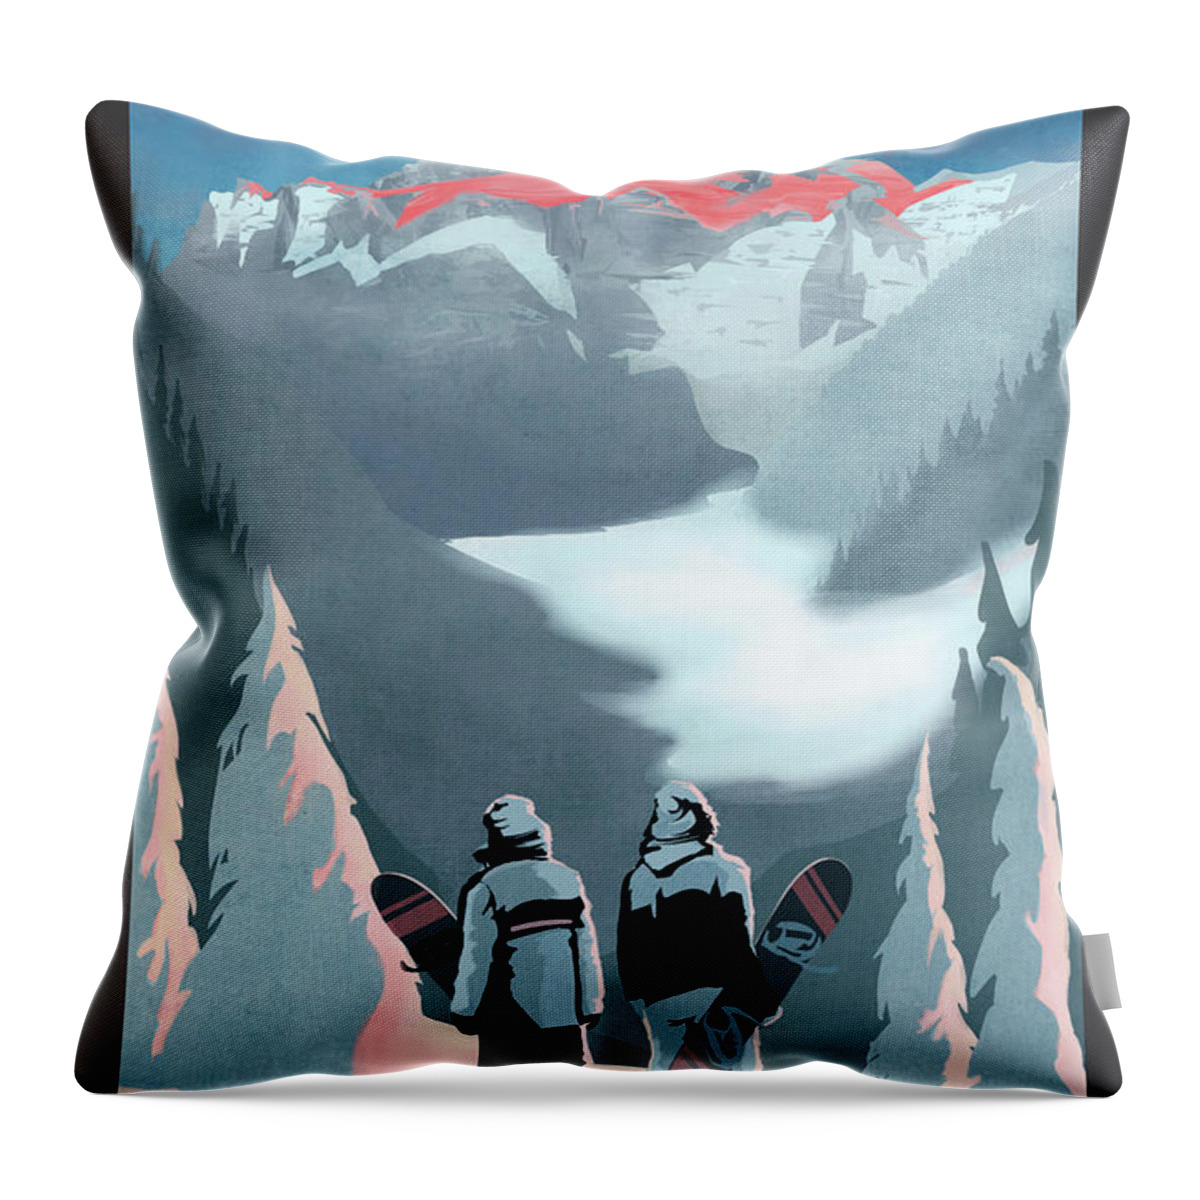 Snowboarder Throw Pillow featuring the painting Scenic Vista Snowboarders by Sassan Filsoof